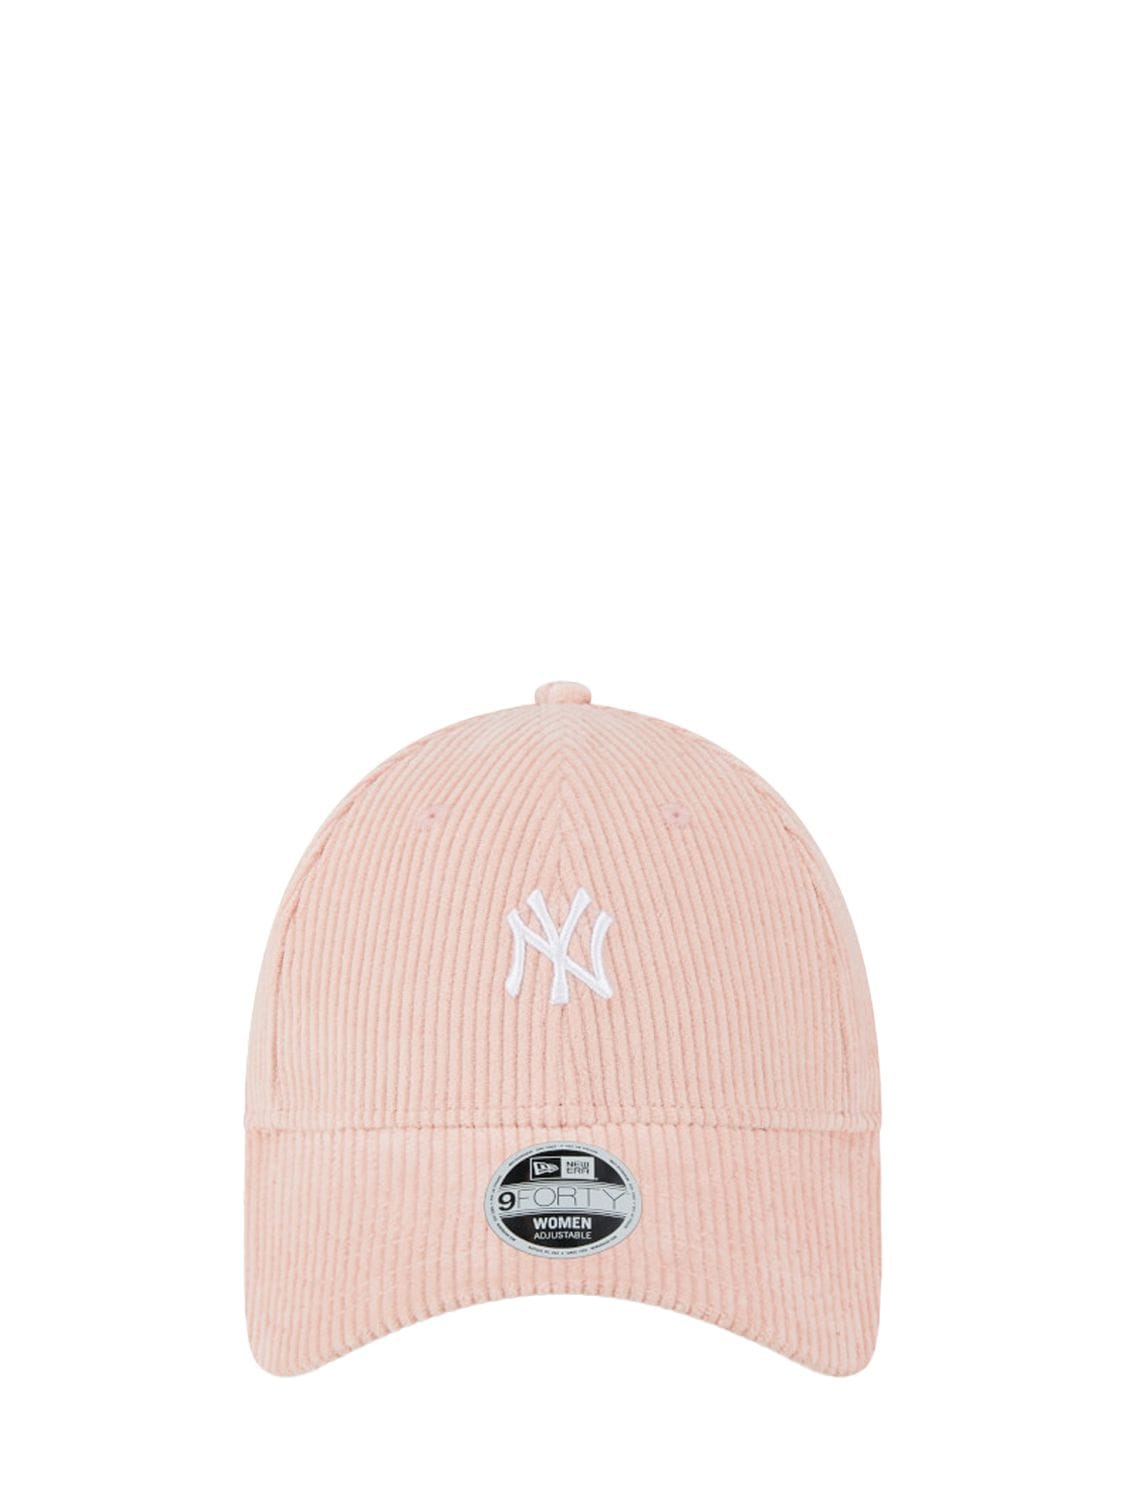 New Era 9forty Ny Yankees Corduroy Cap In Pink,white